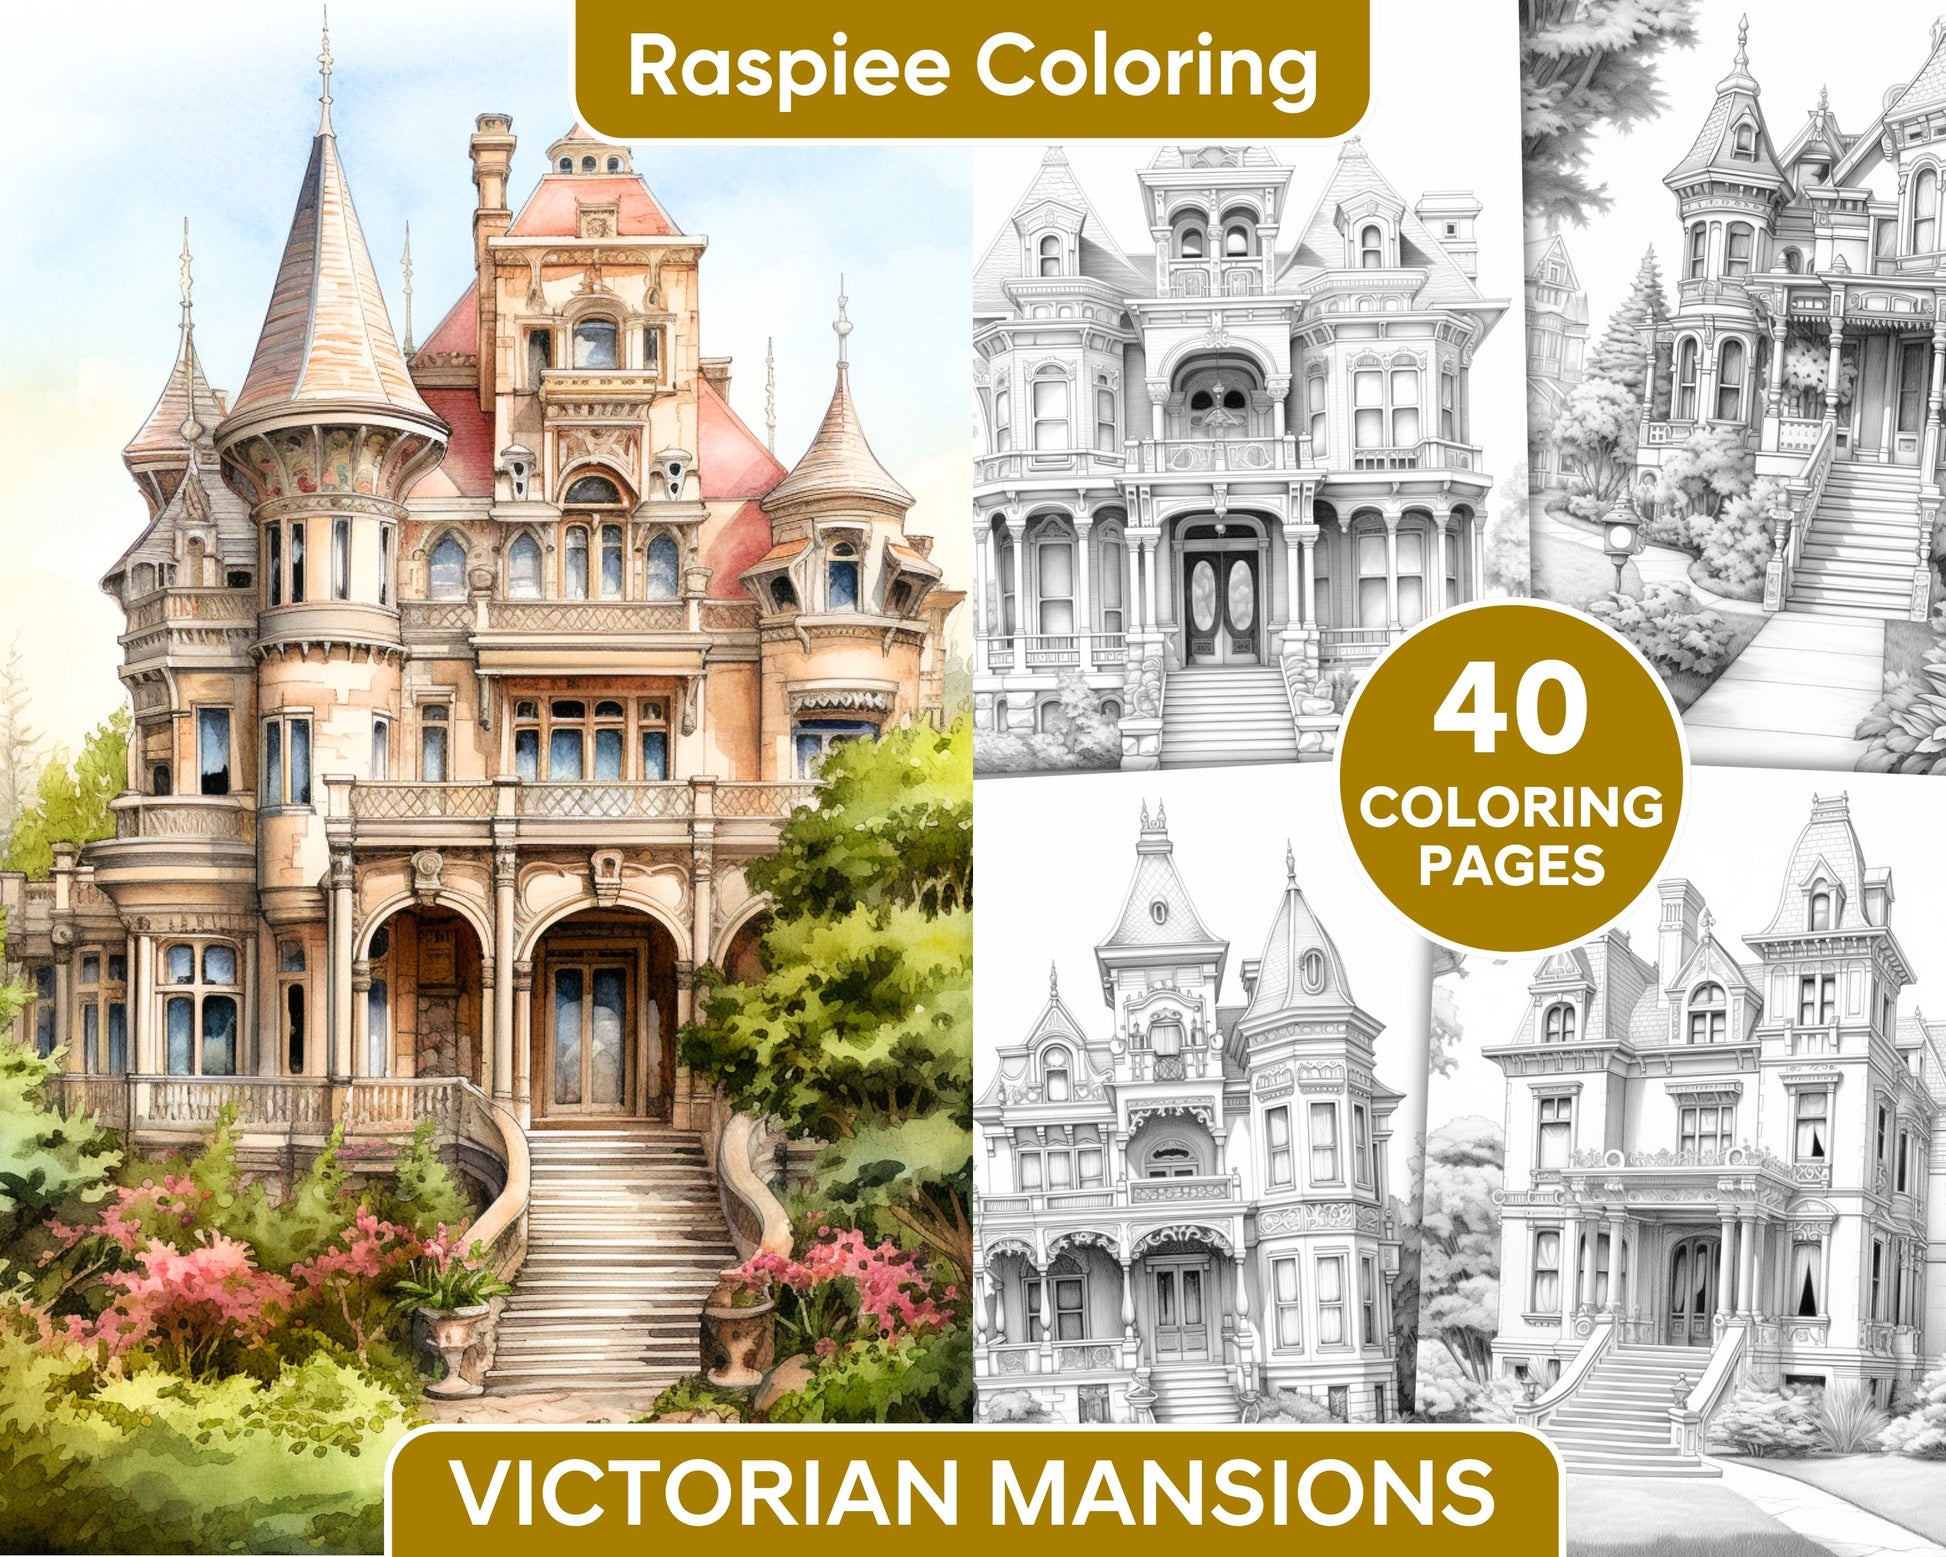 Grayscale Coloring Pages, Victorian Mansions Coloring, Adult Coloring Art, Victorian Coloring Pages, Intricate Designs for Coloring, Relaxing DIY Coloring, Architecture Coloring Pages, Stress Relief Coloring Pages, Instant Download Coloring